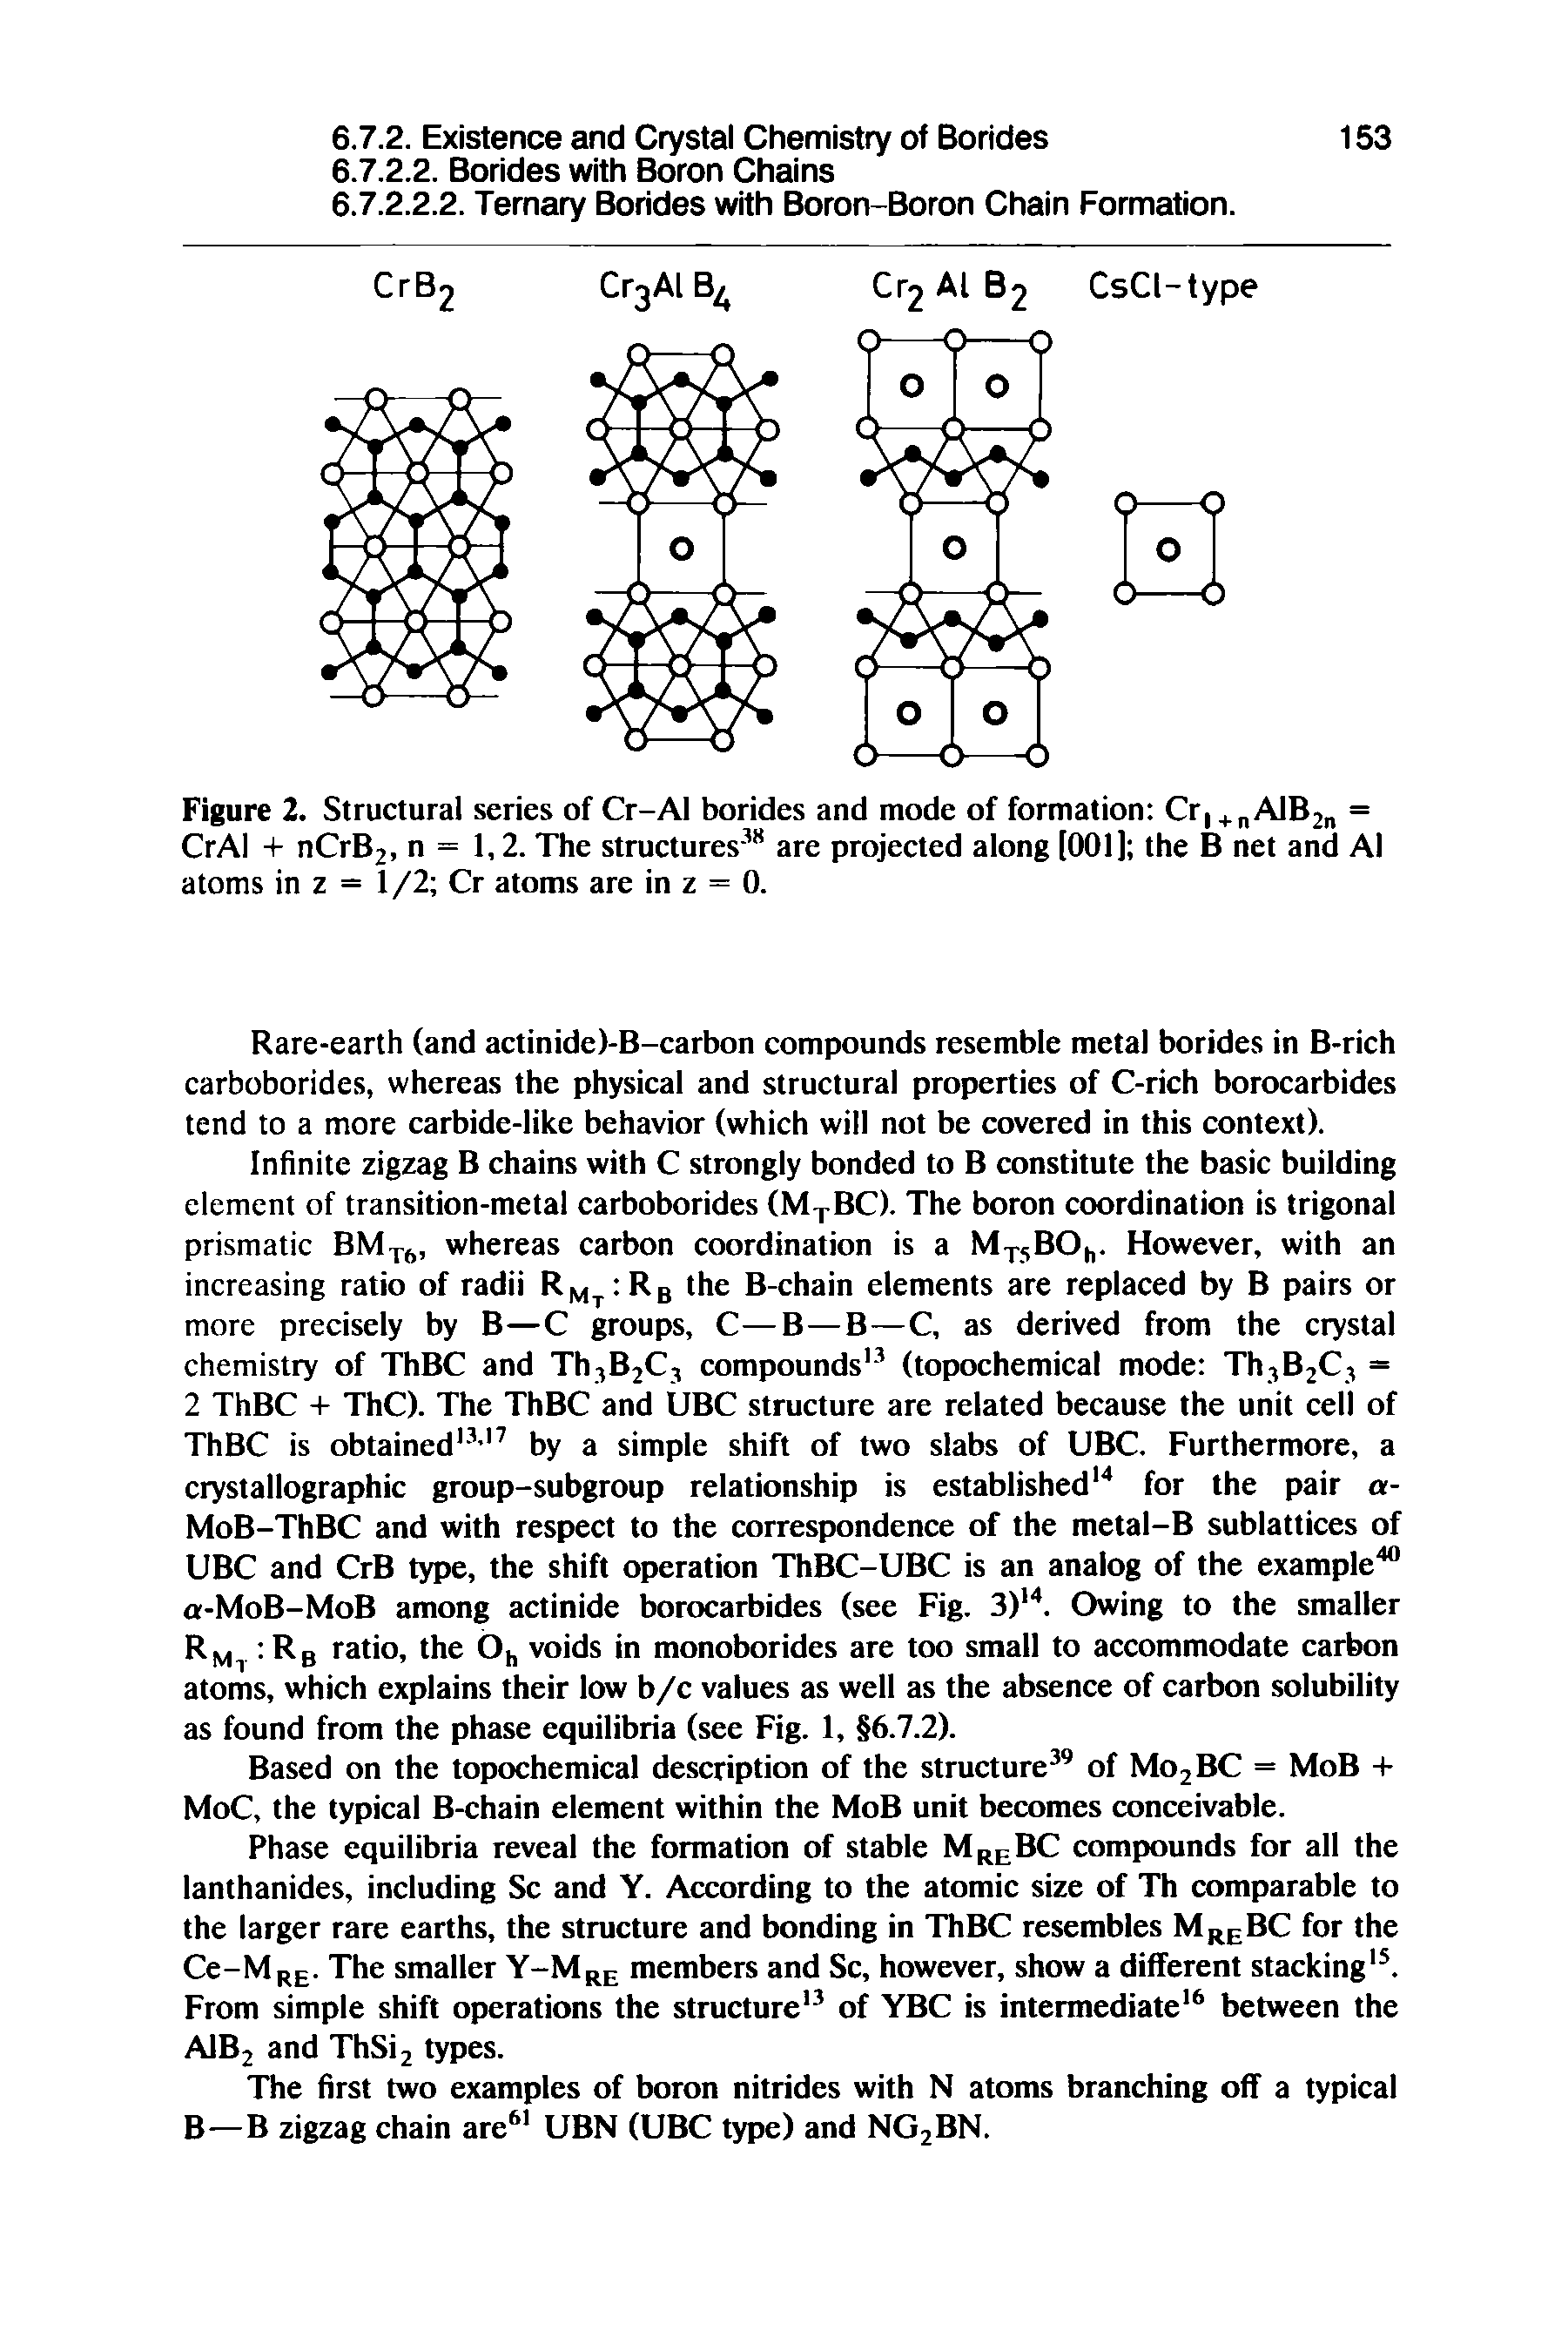 Figure 2. Structural series of Cr-AI borides and mode of formation Crn. AlB2 = CrAI + nCrB2, n = 1,2. The structures are projected along [001] the B net and Al atoms in z = 1 /2 Cr atoms are in z = 0.